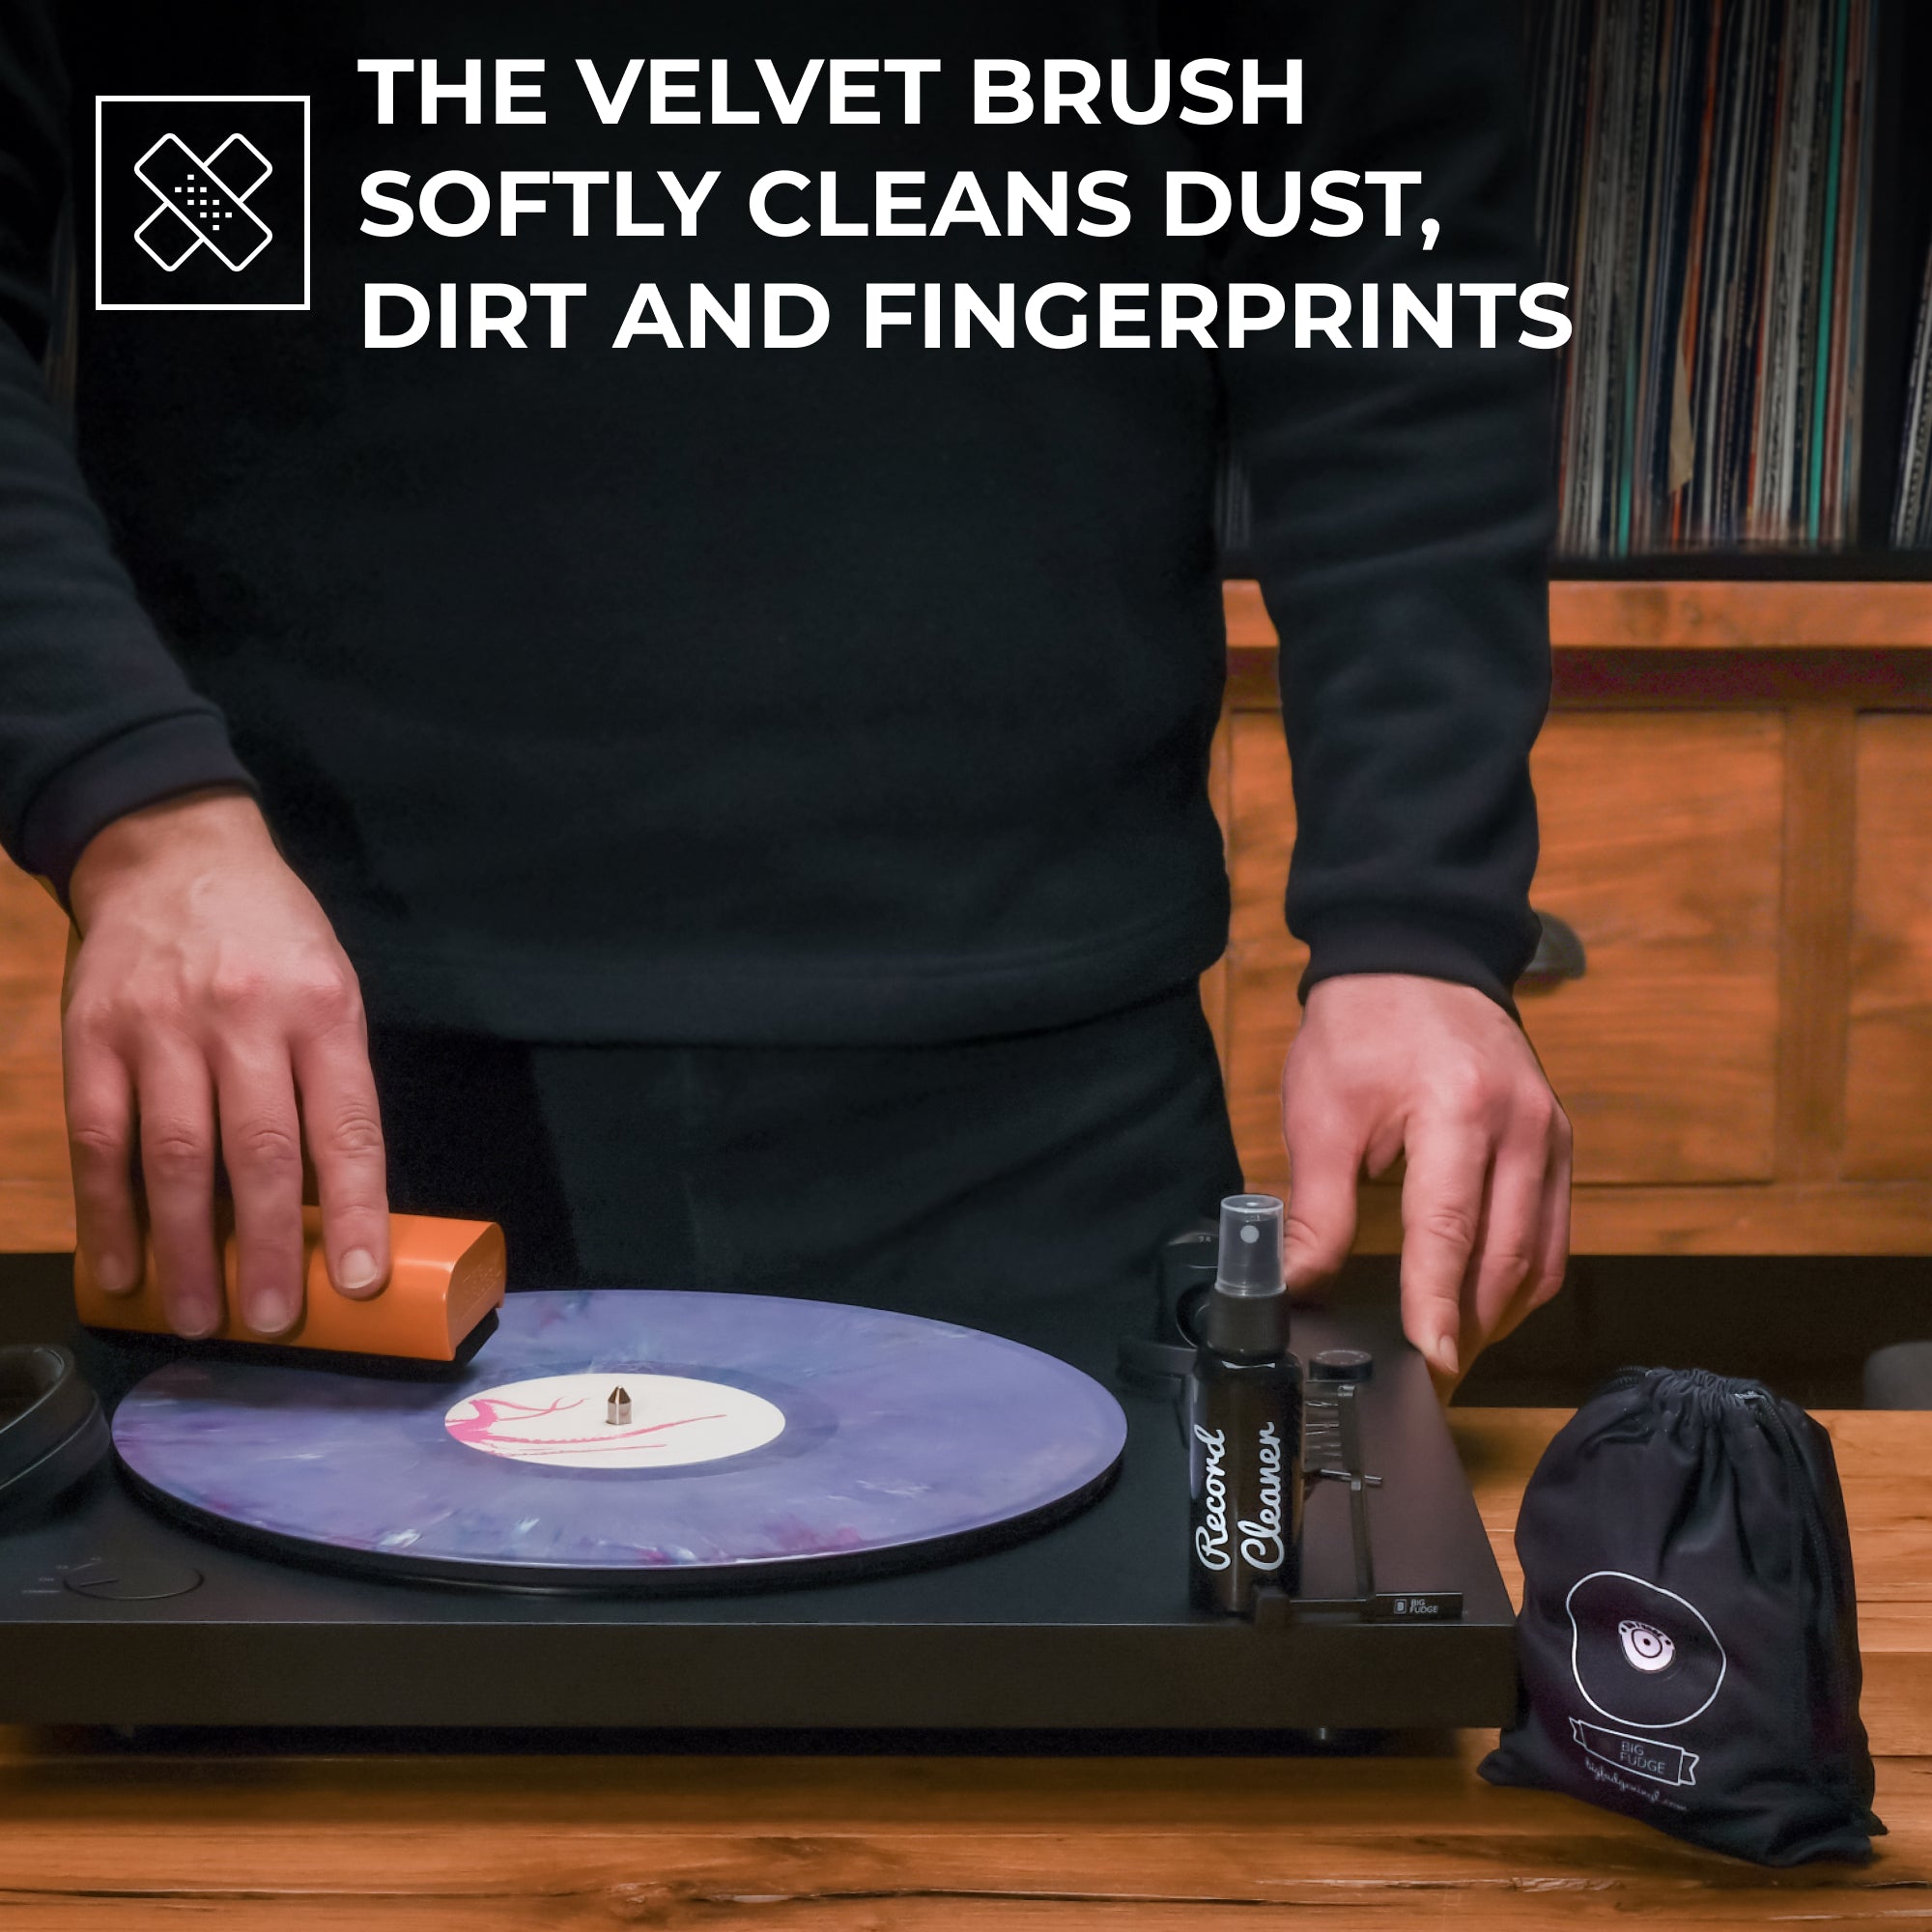 Vinyl Record Cleaning Solution | 4-in-1 Care Kit